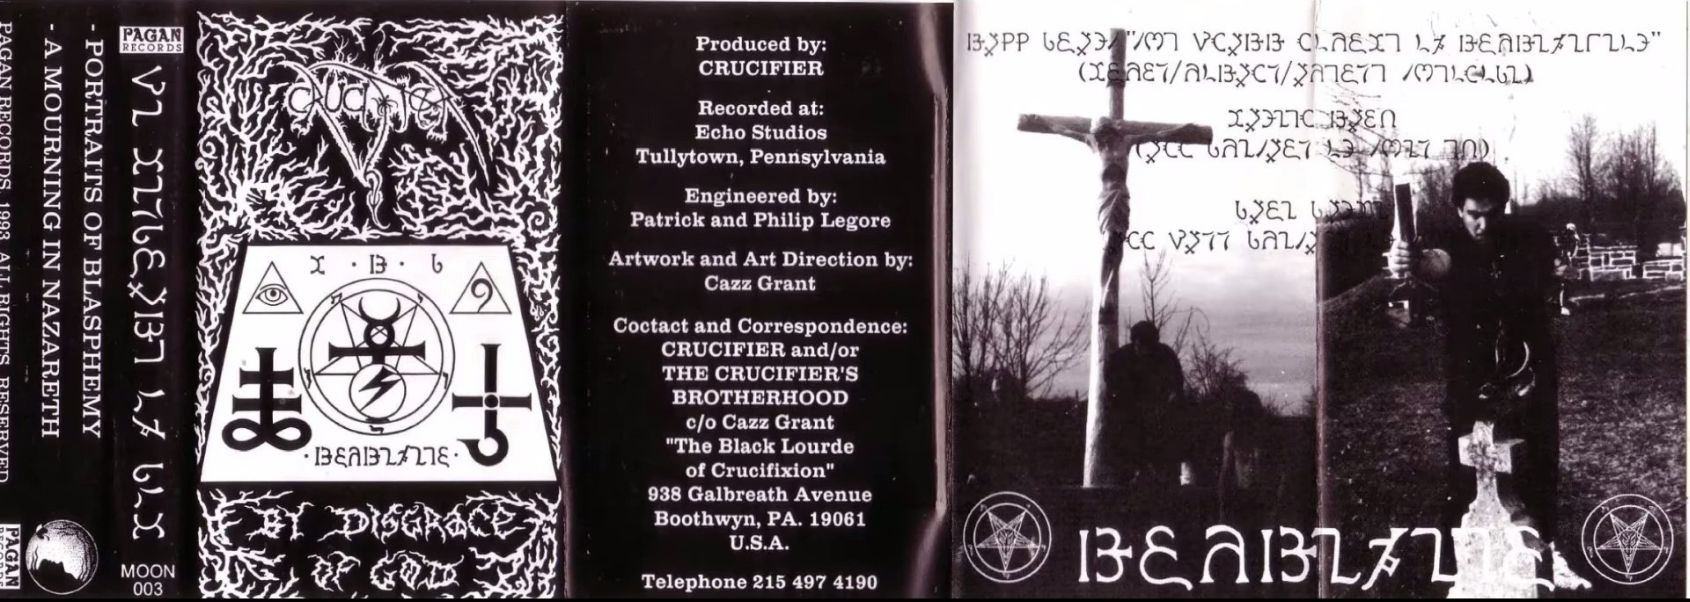 Crucifier - By Disgrace of God